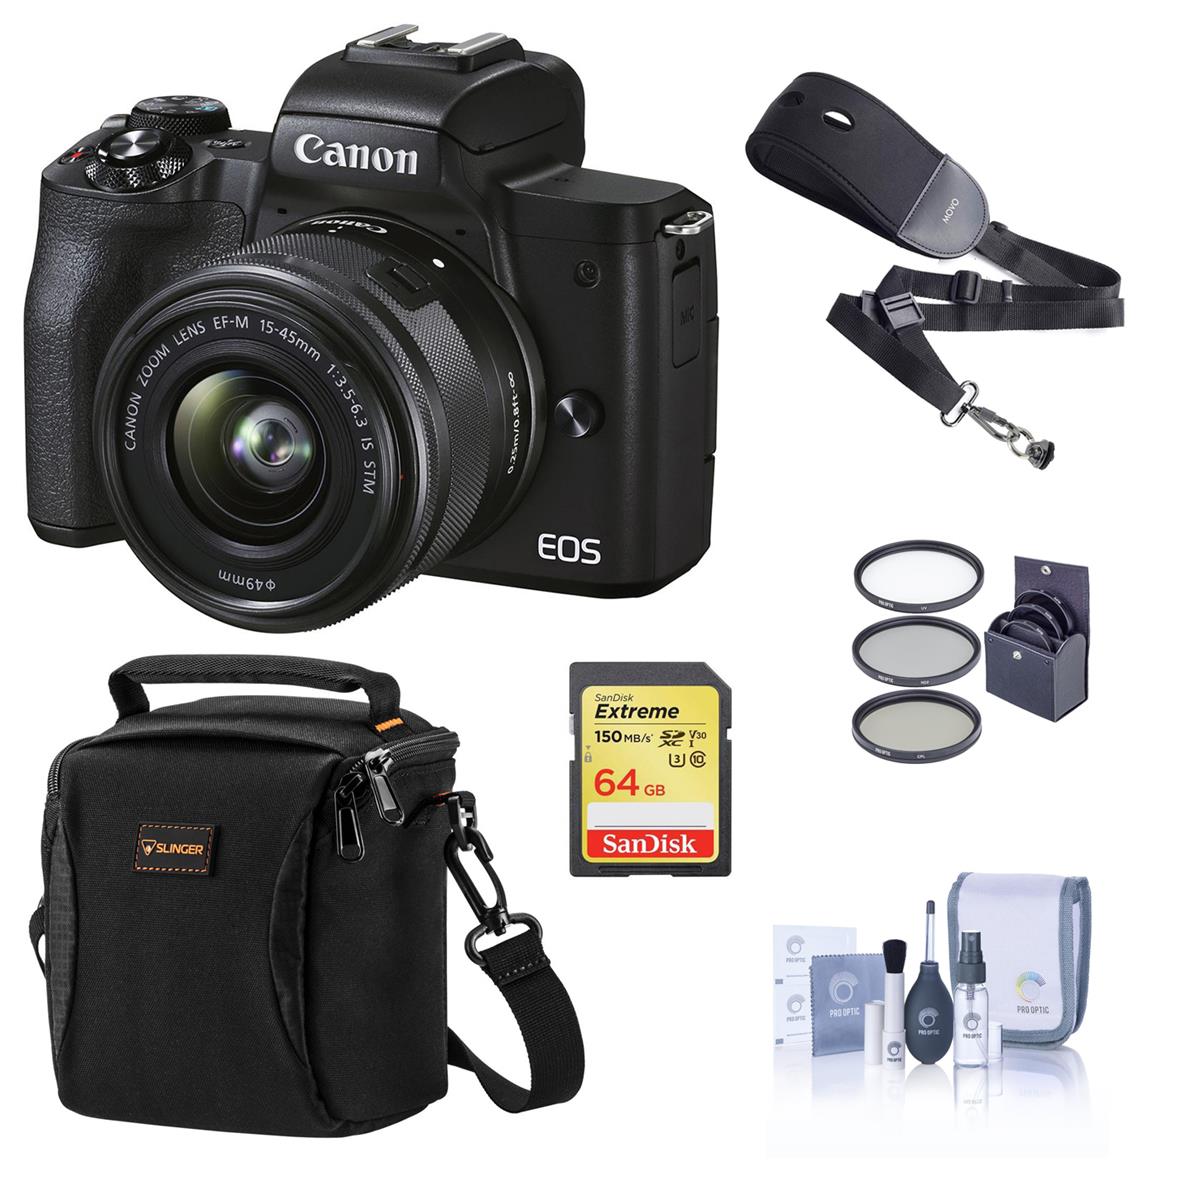 Image of Canon EOS M50 Mark II Mirrorless Camera with 15-45mm Lens (Black) with Free Acc.